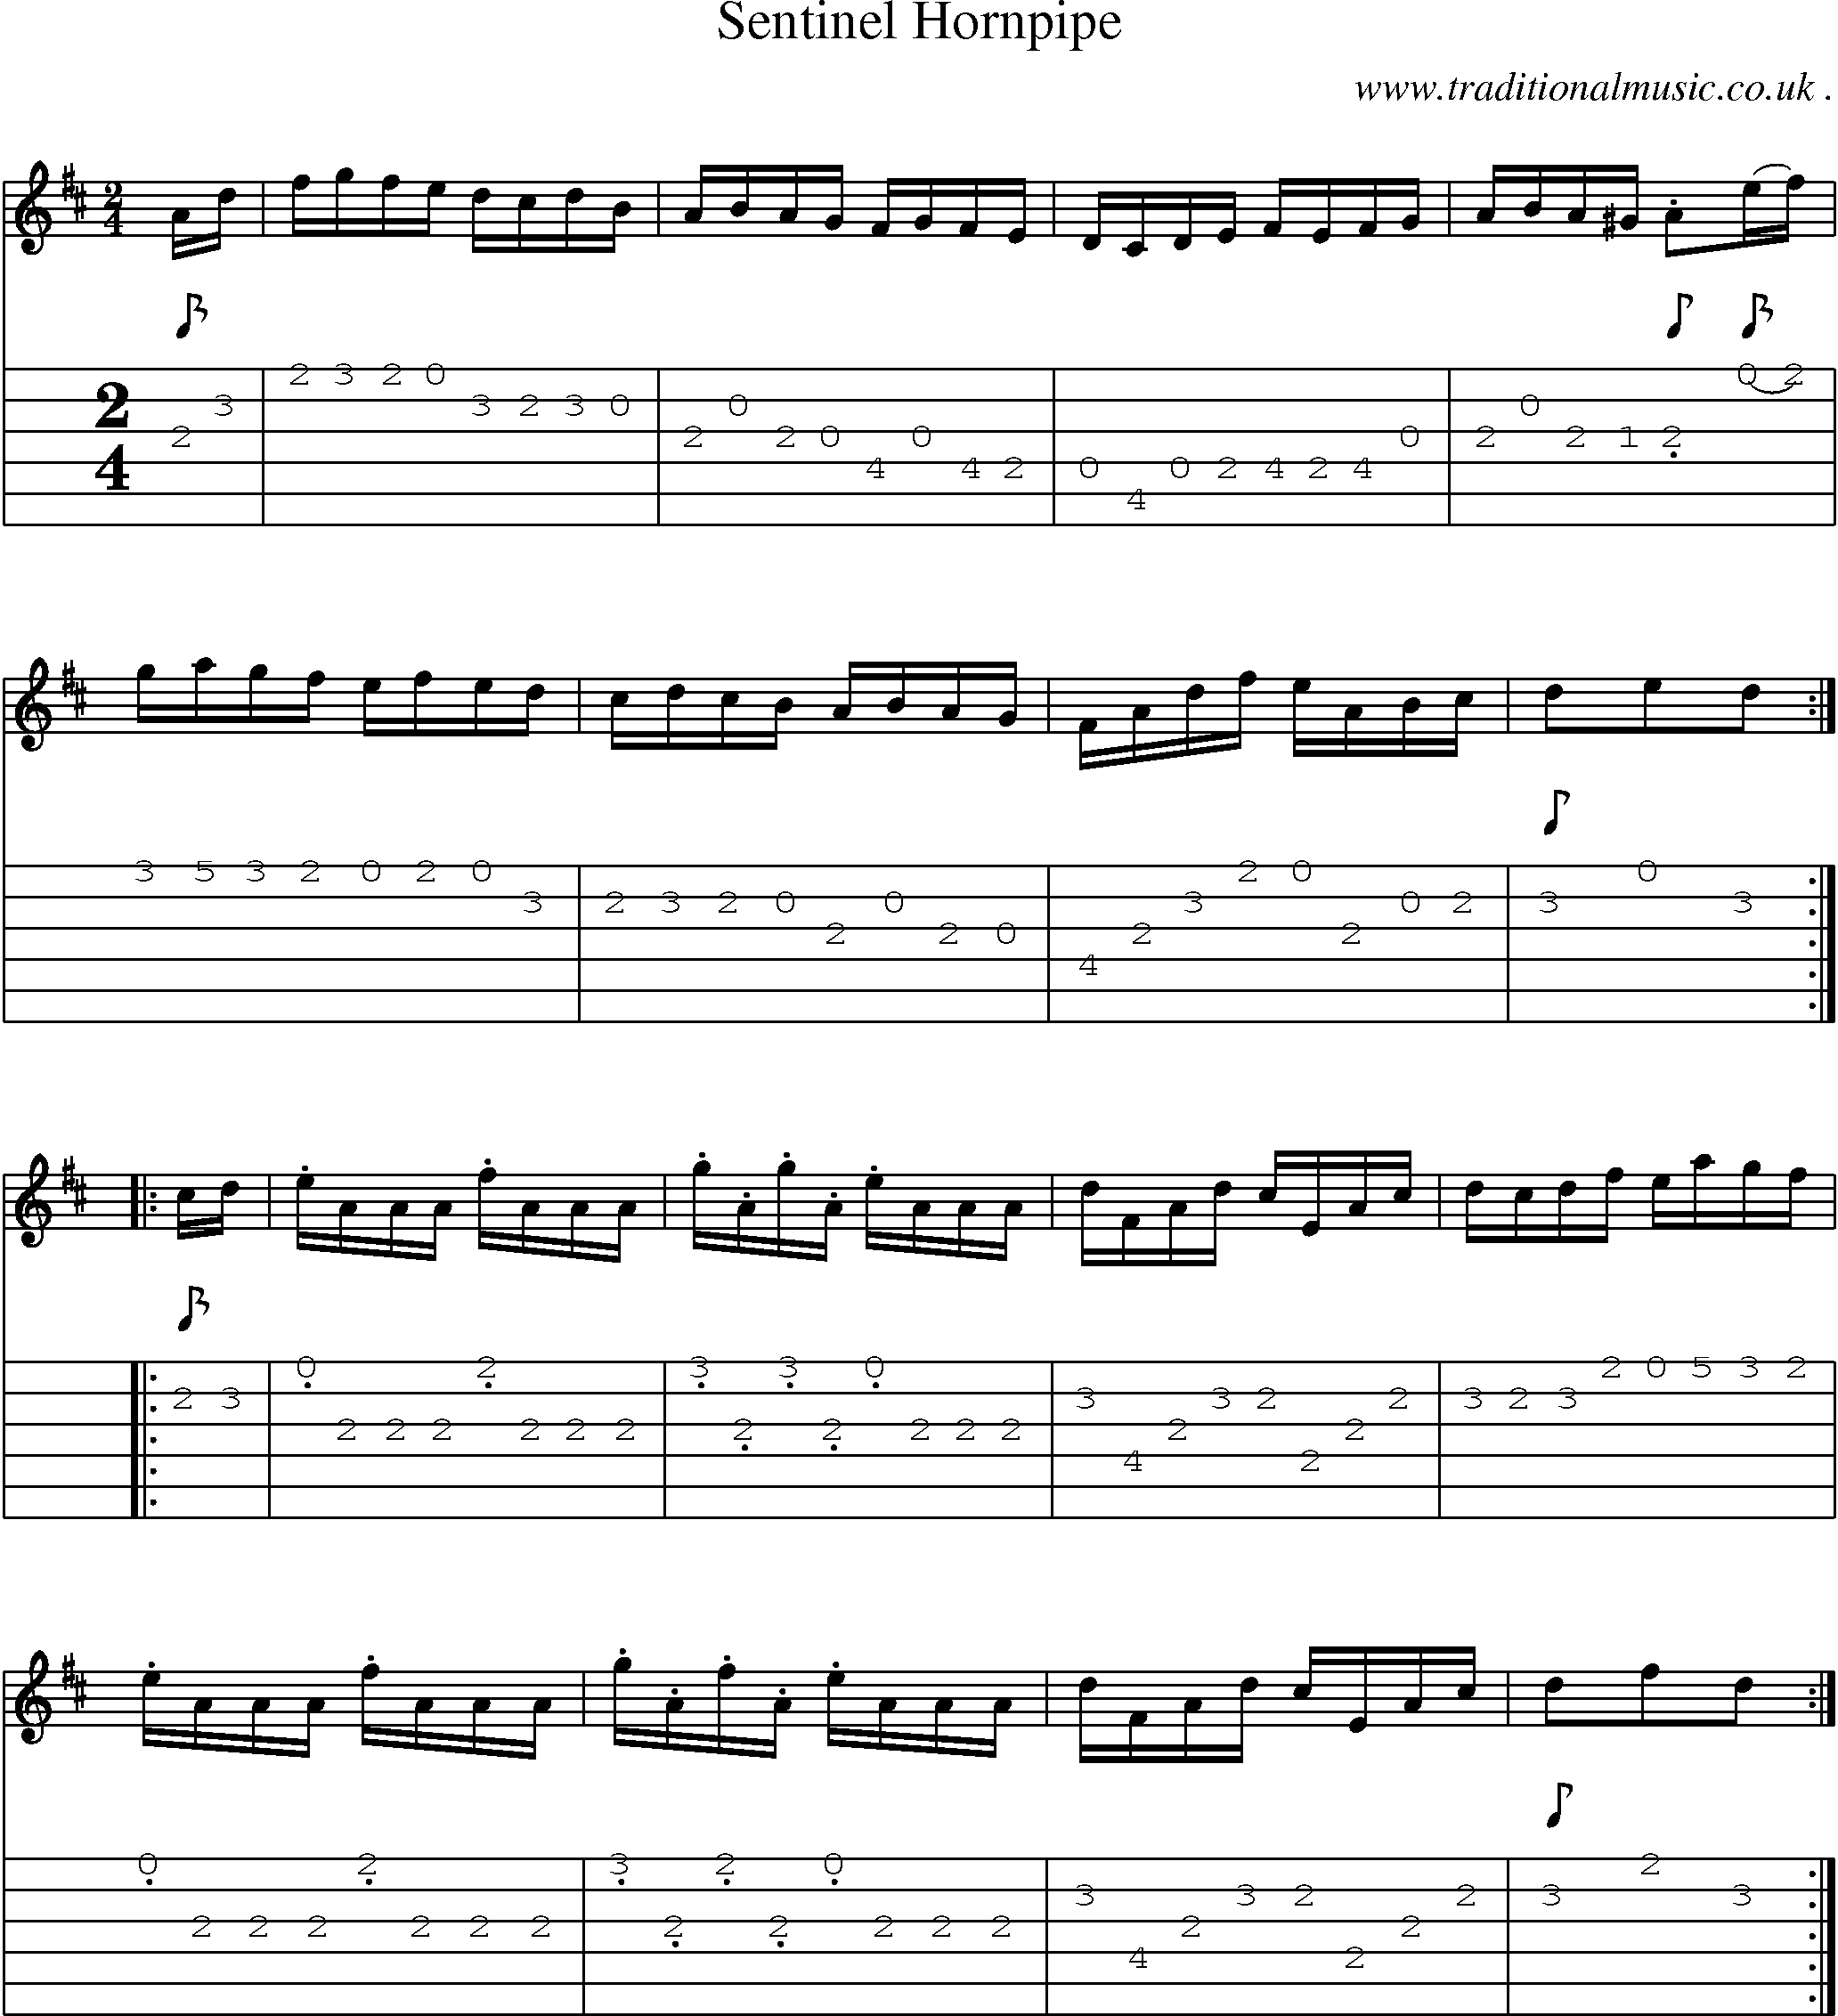 Sheet-Music and Guitar Tabs for Sentinel Hornpipe